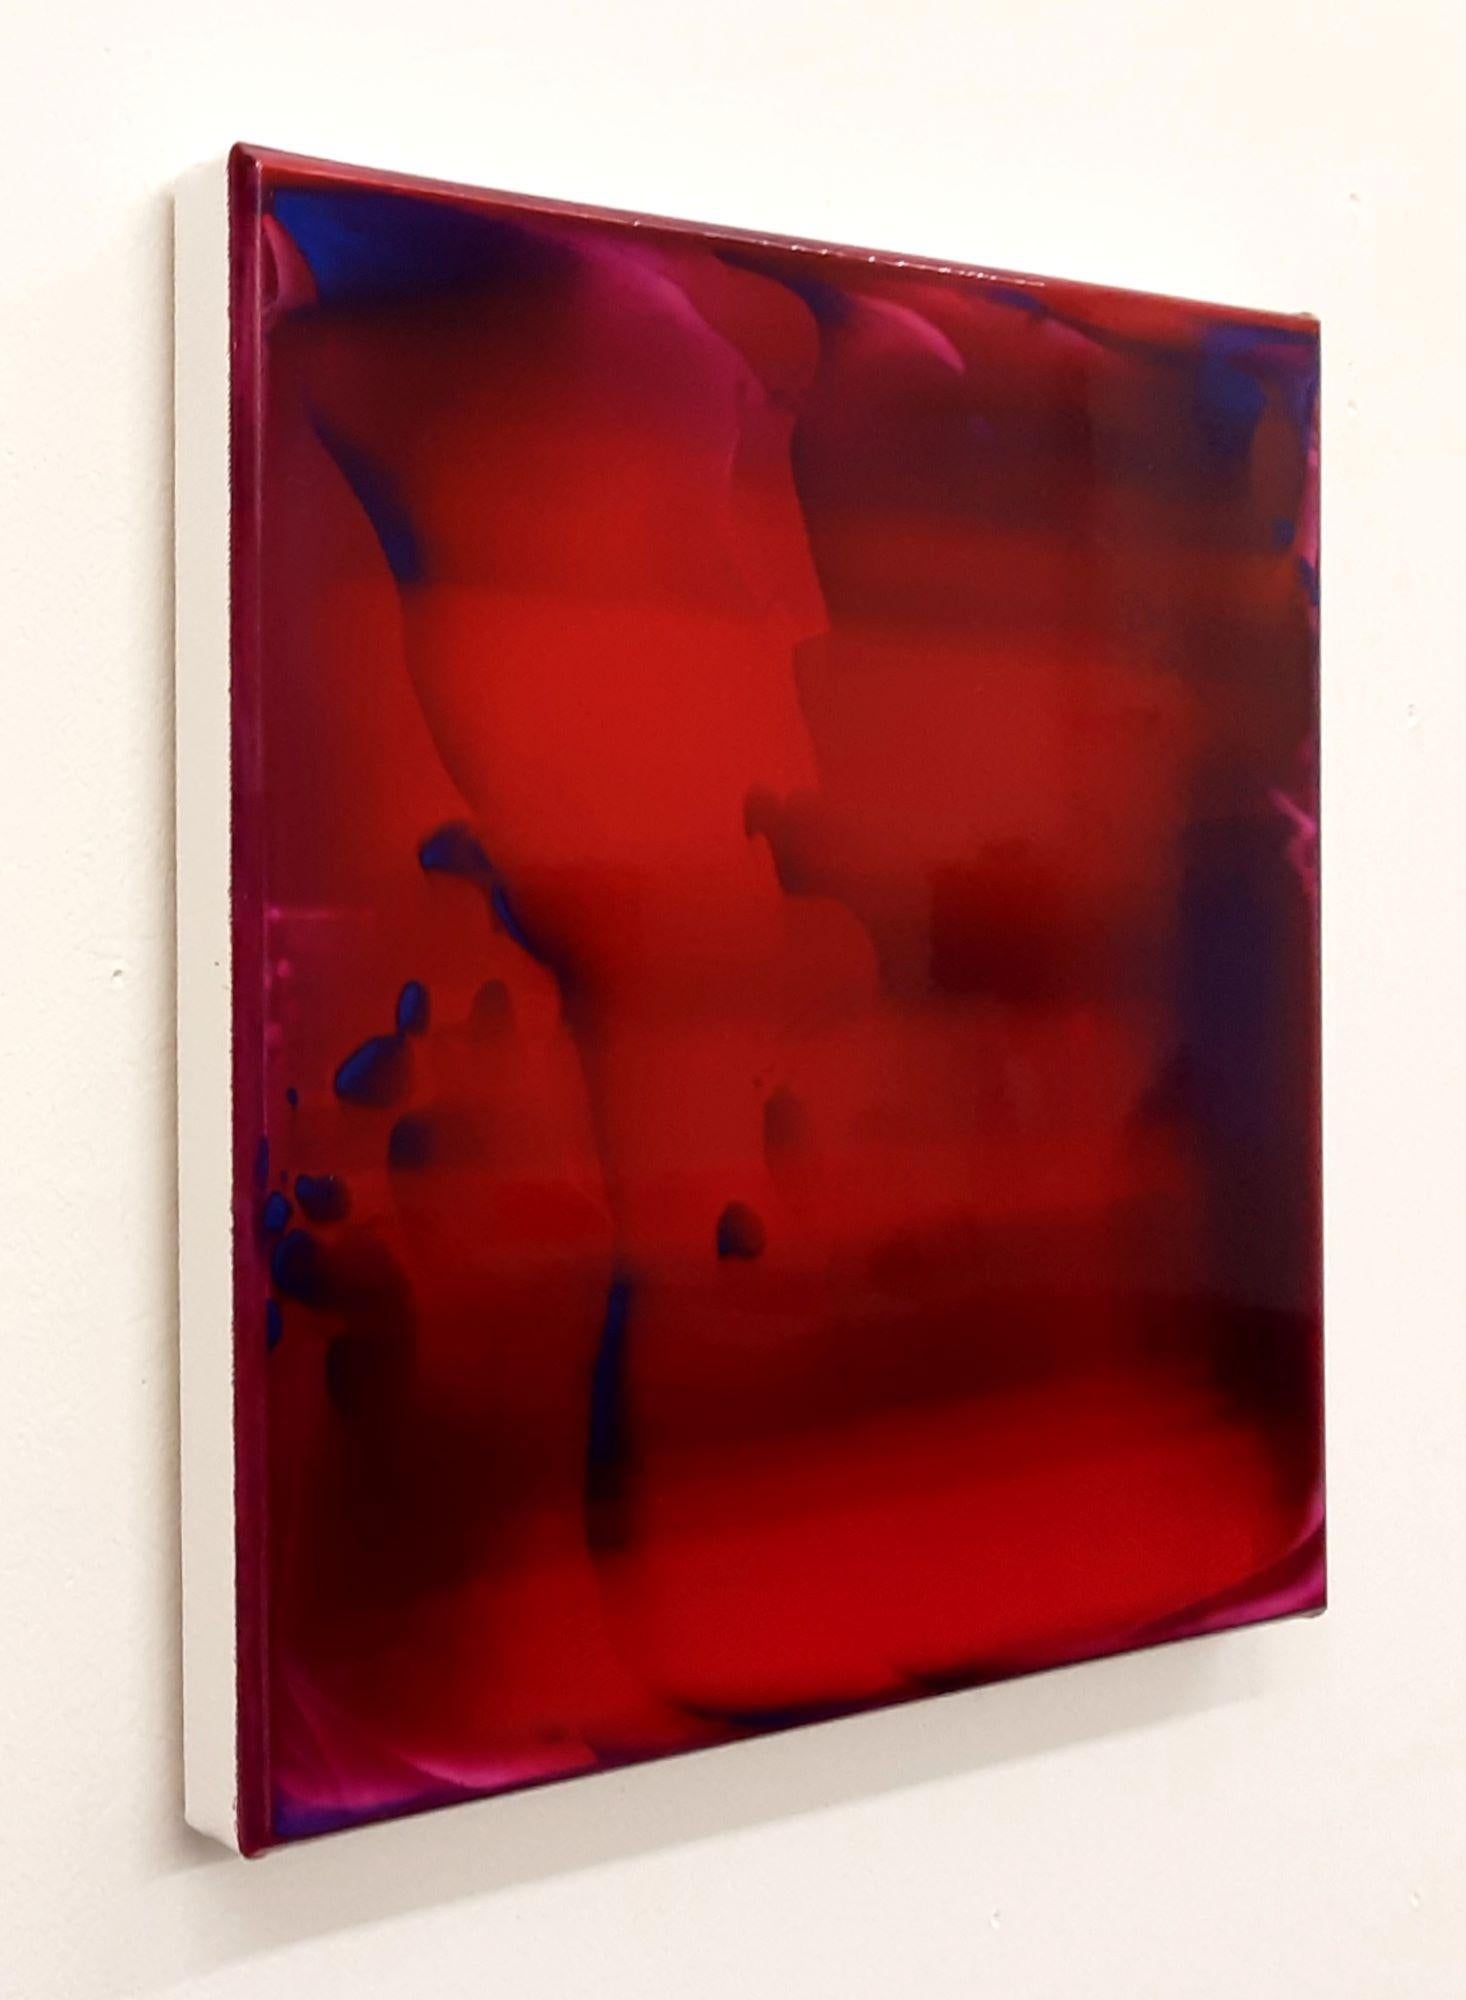 Resonance (30/21) by James Lumsden - Abstract painting, deep red, glossy For Sale 1